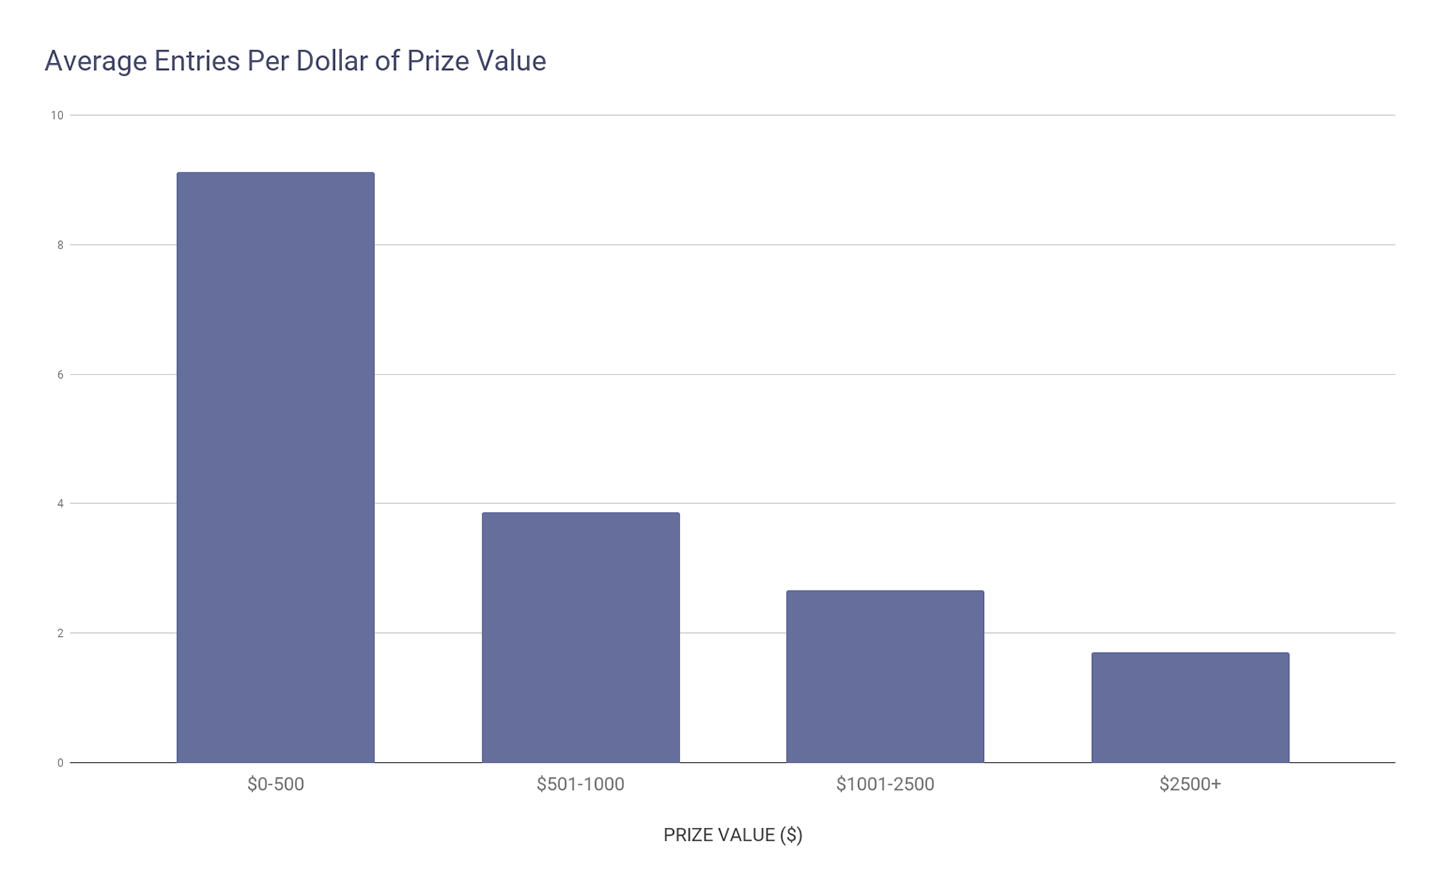 Average entries per dollar of prize value.